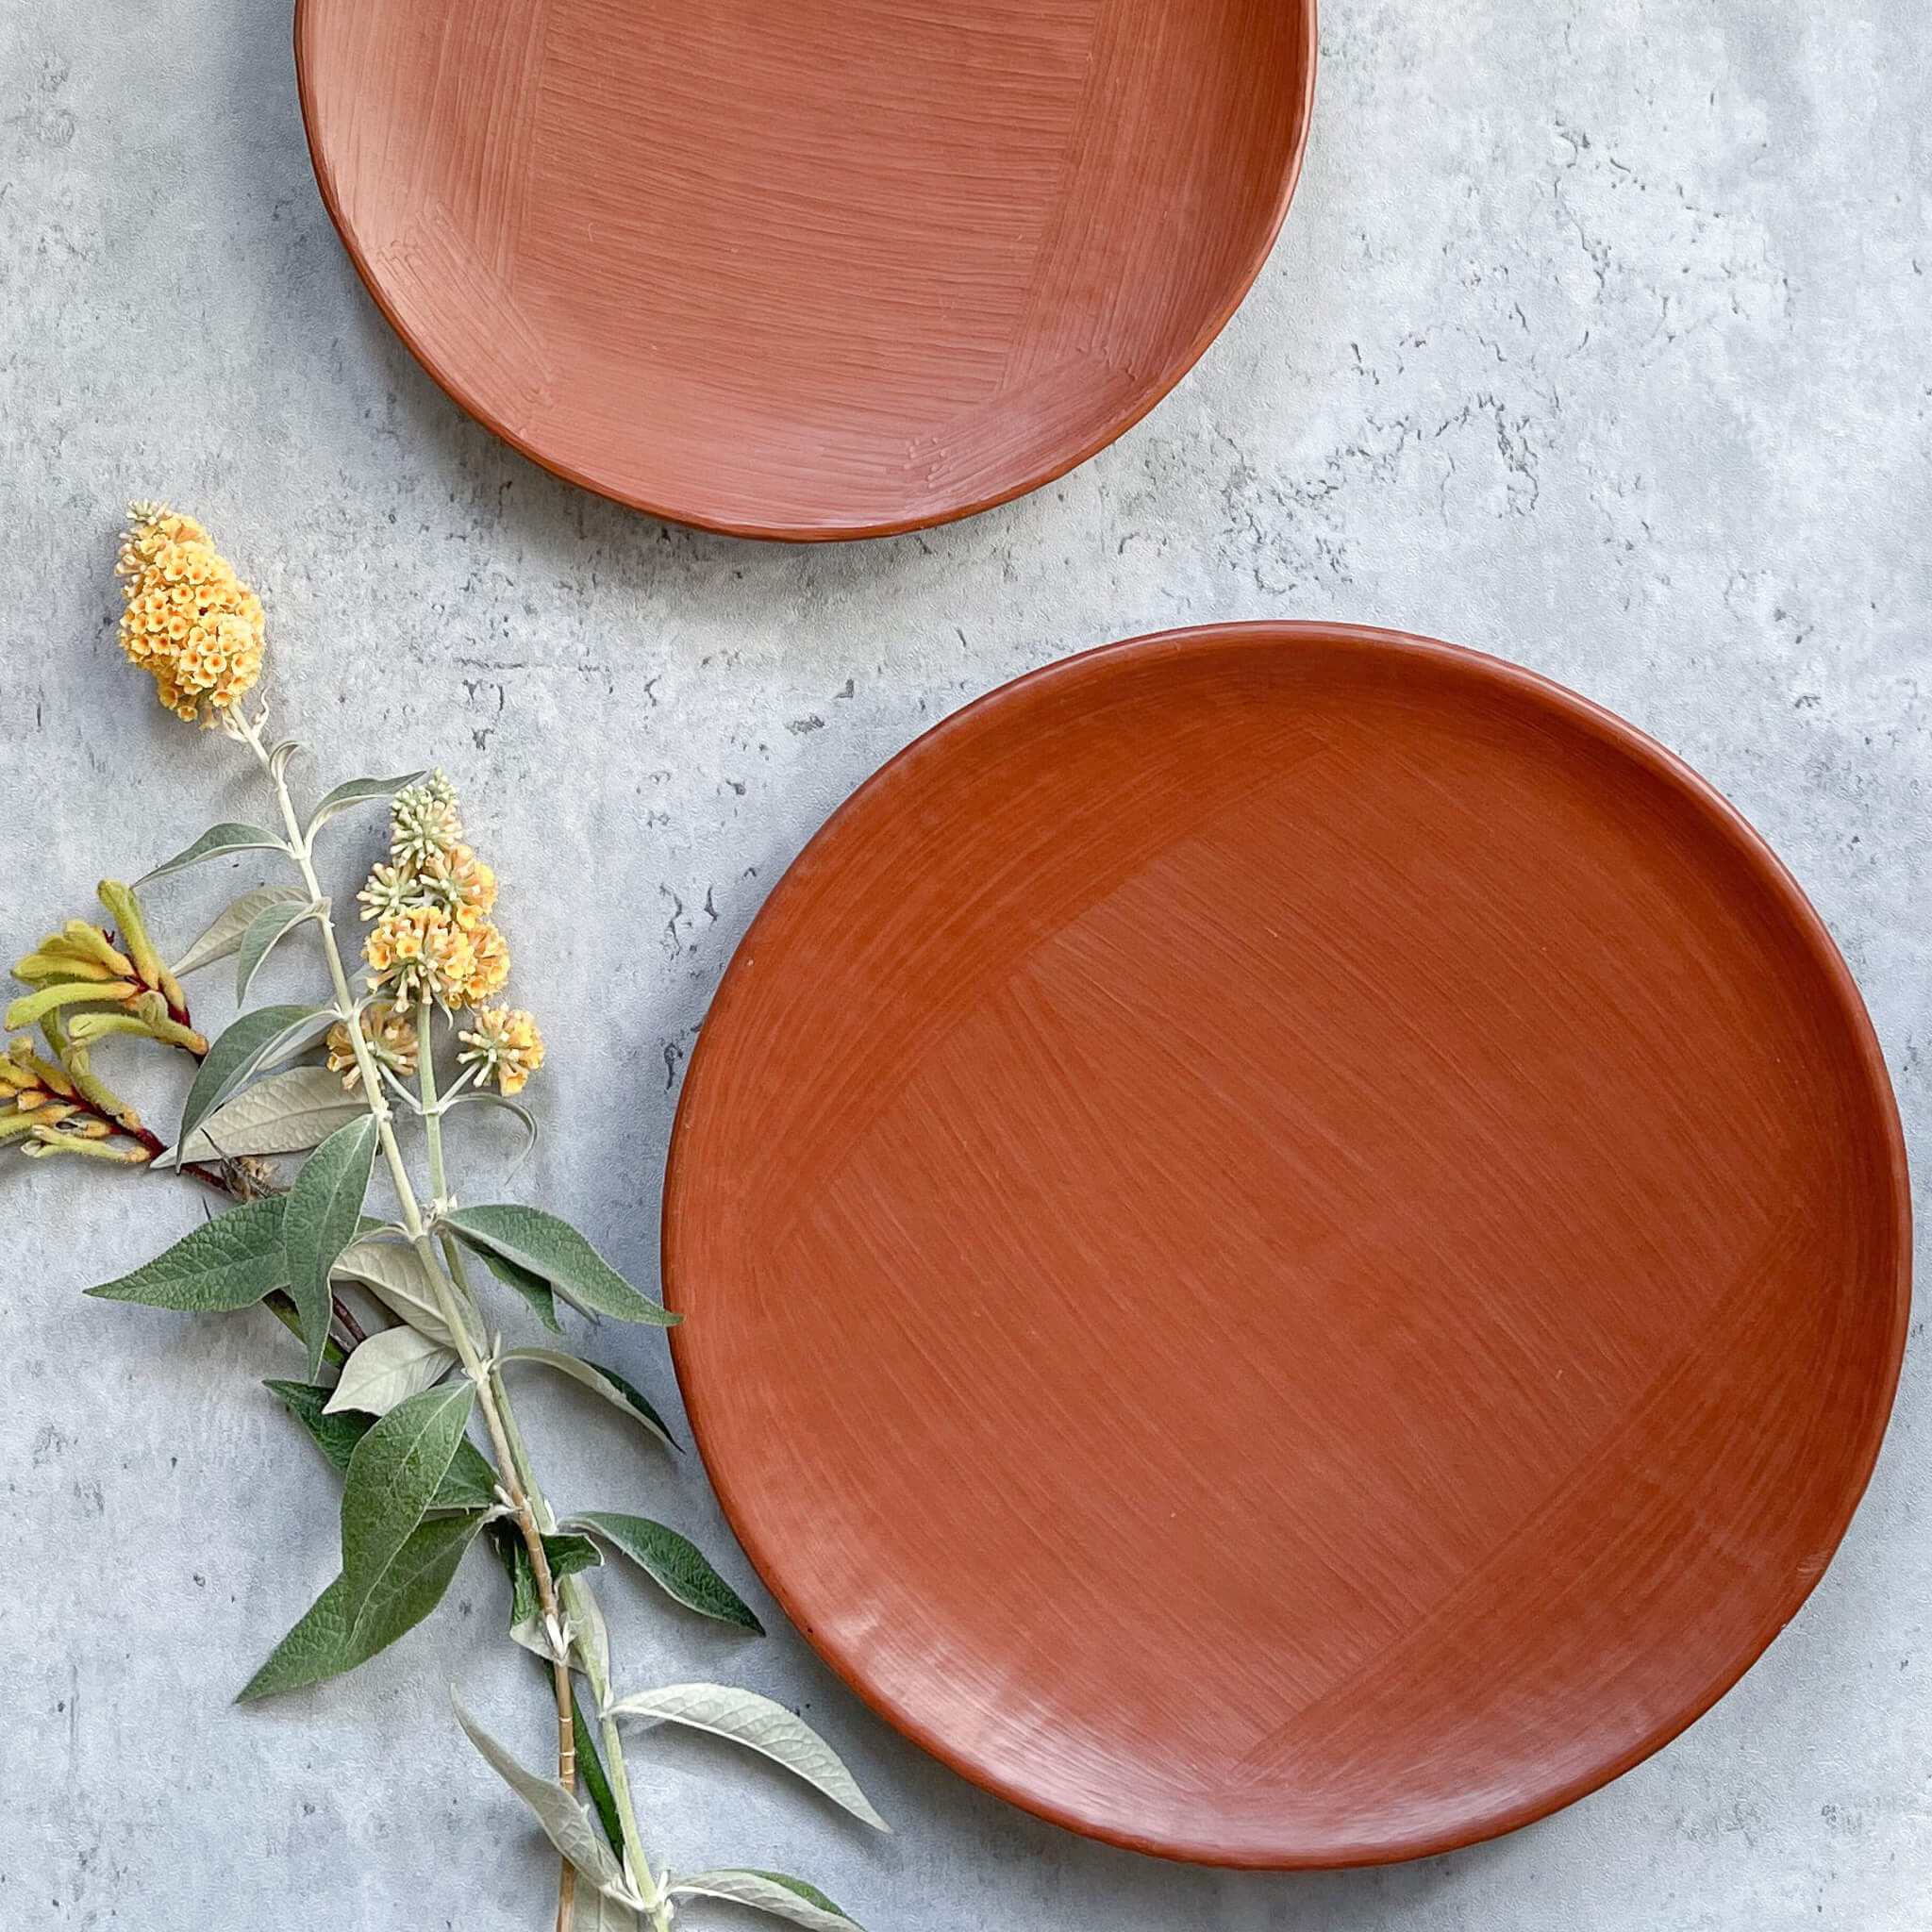 A Oaxaca red clay dinner plate with a salad plate, next to a floral sprig.